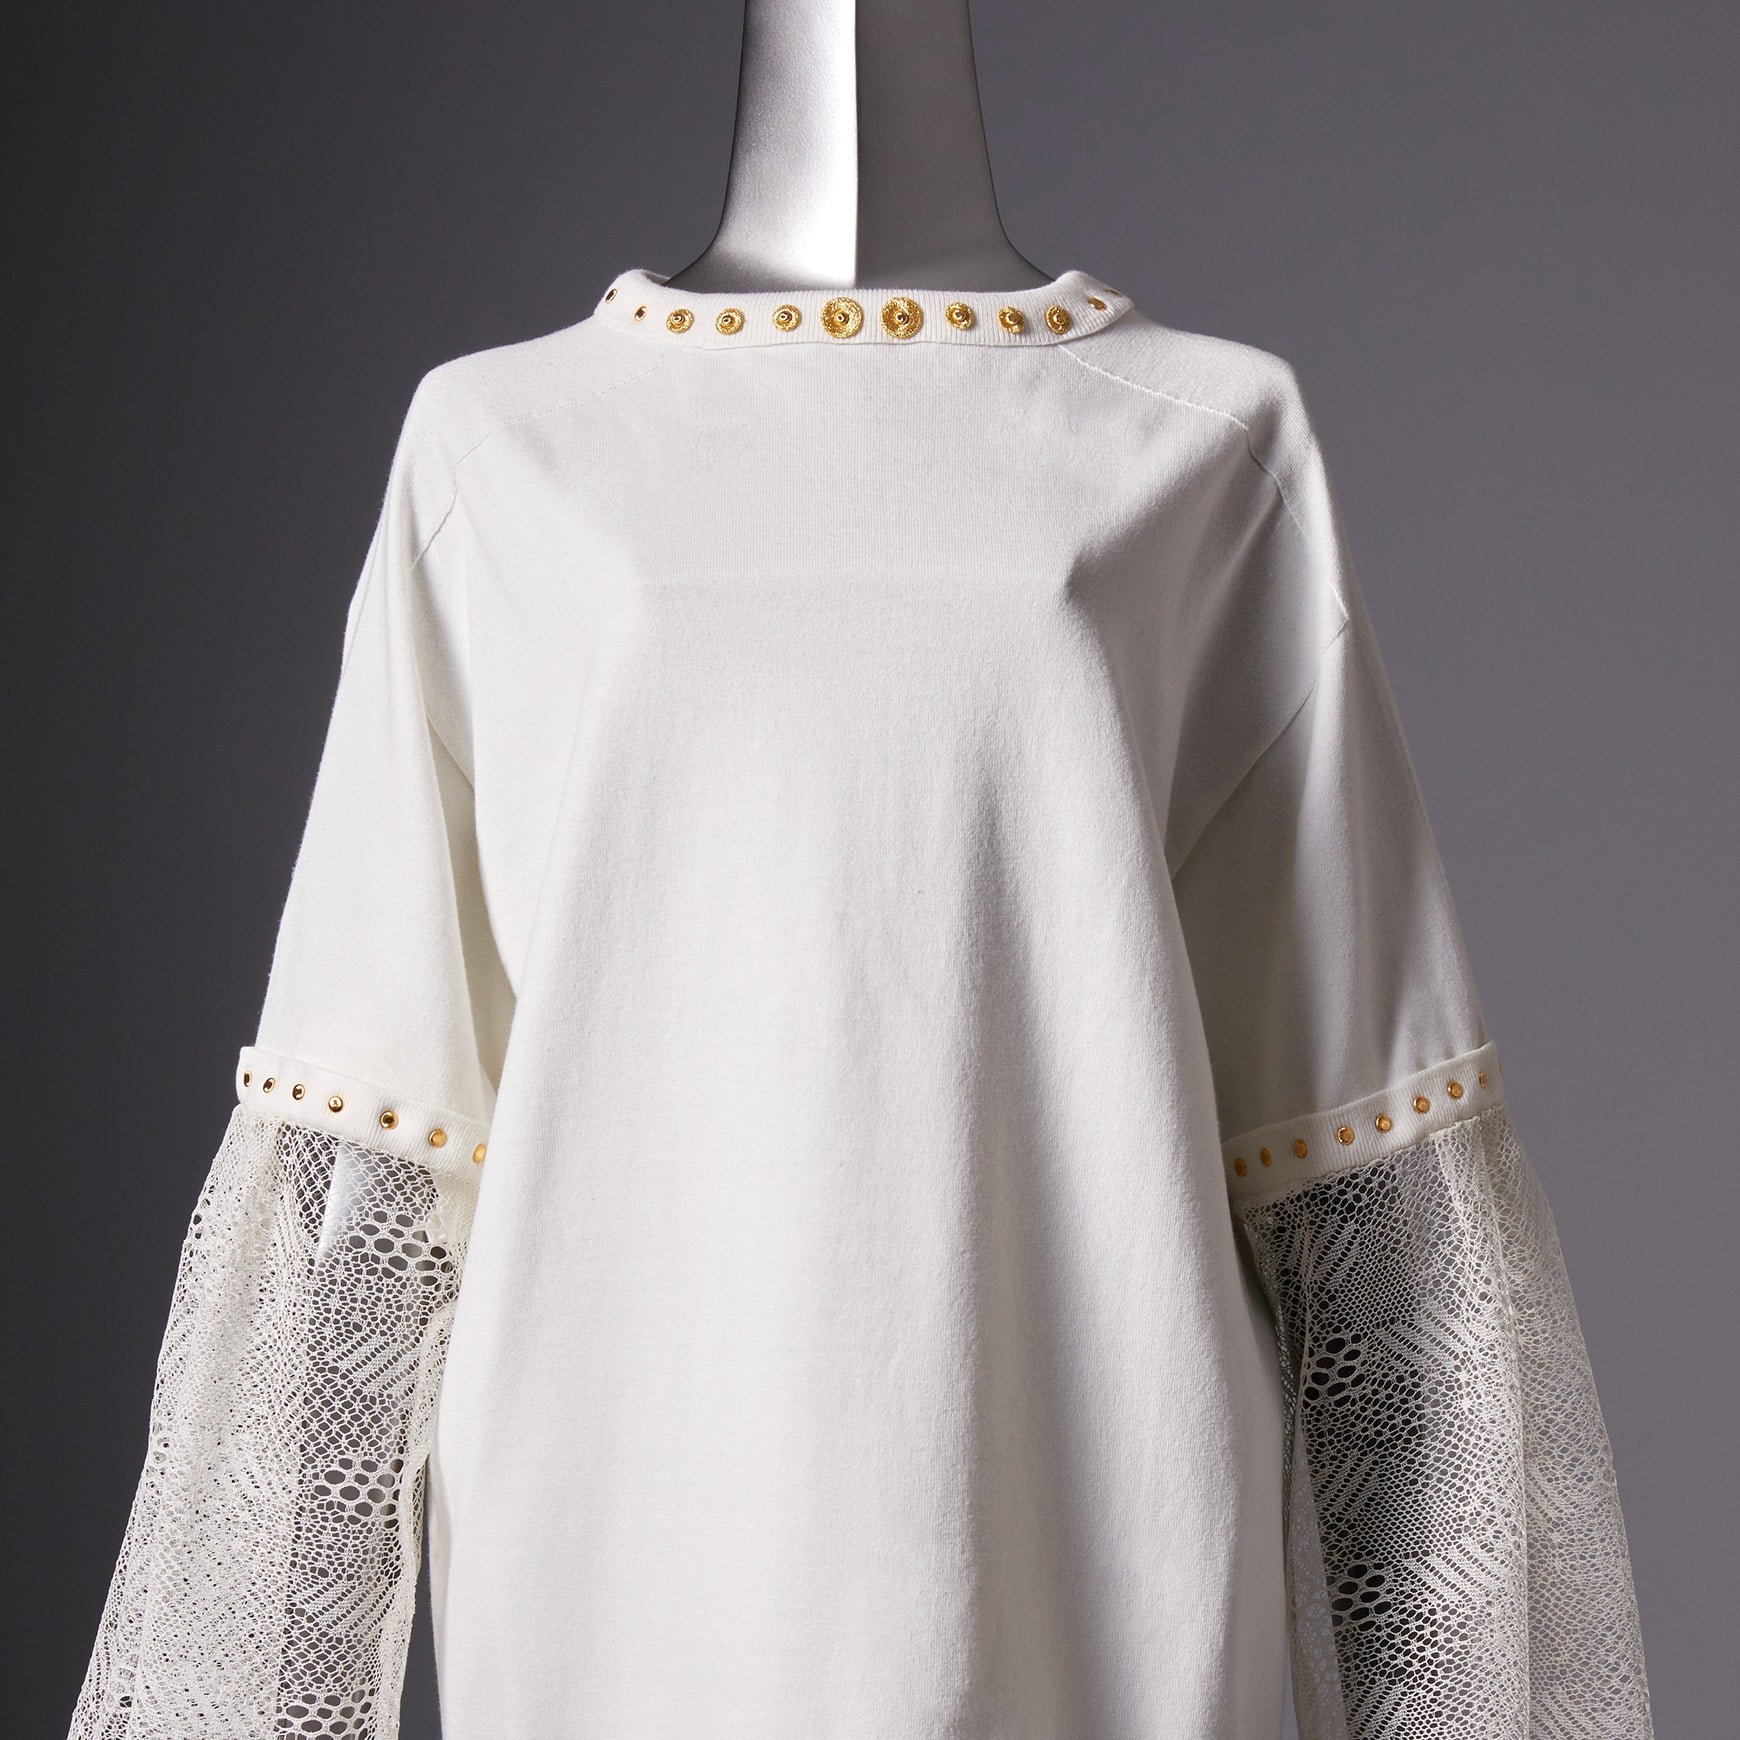 TYPE-1 Knit Organic Cotton Half Sleeves with French Lace Sleeve Parts Long and Gold Washer(White Cells)